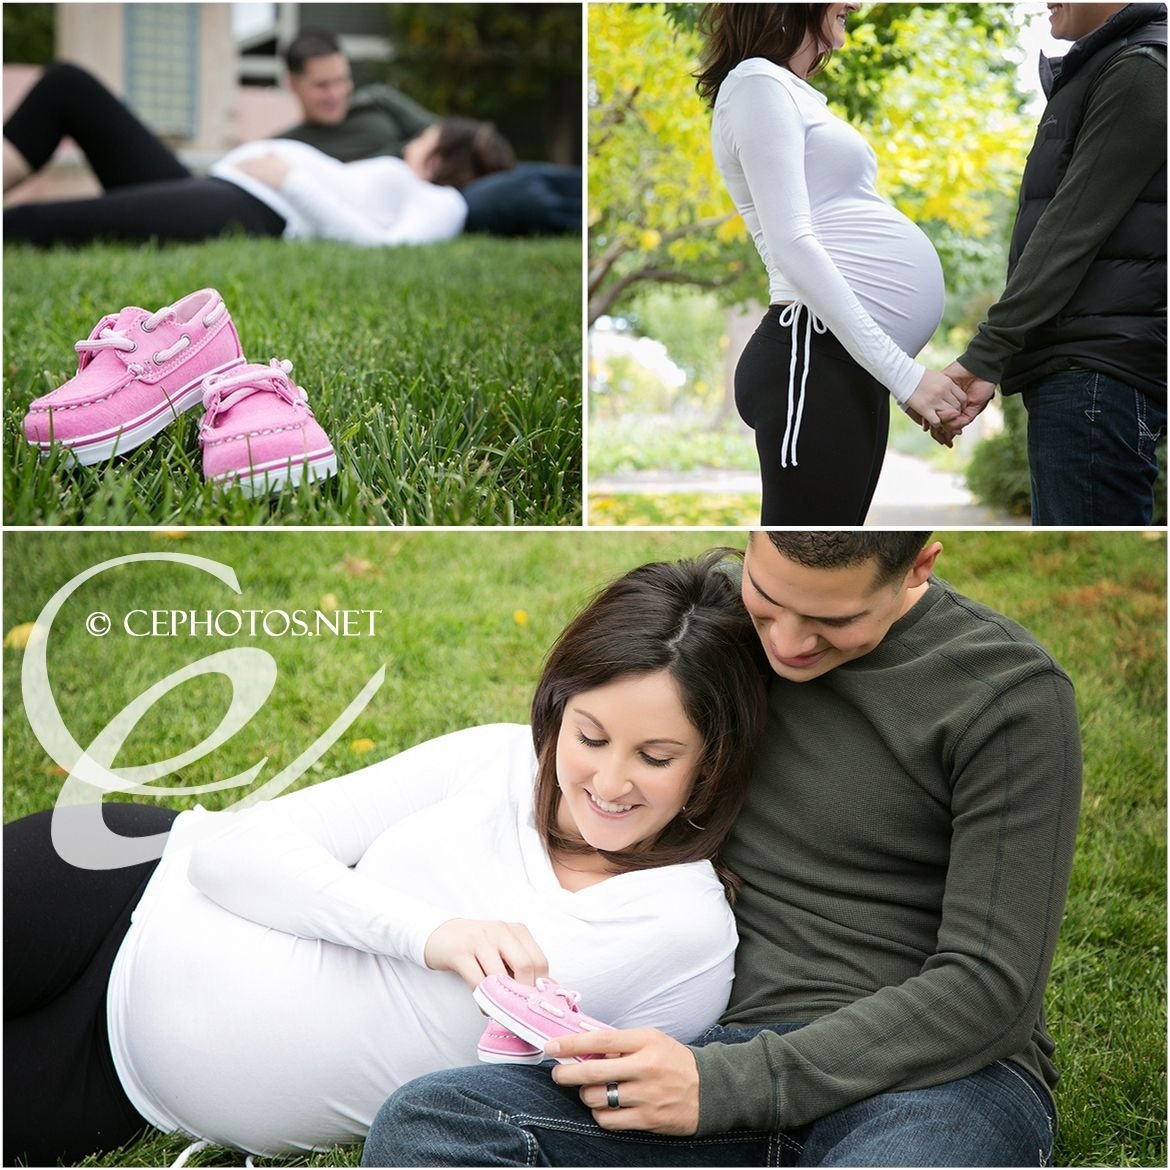 10 Stunning Maternity Picture Ideas With Husband maternity pictures ideas with husband google search pregnancy 2022